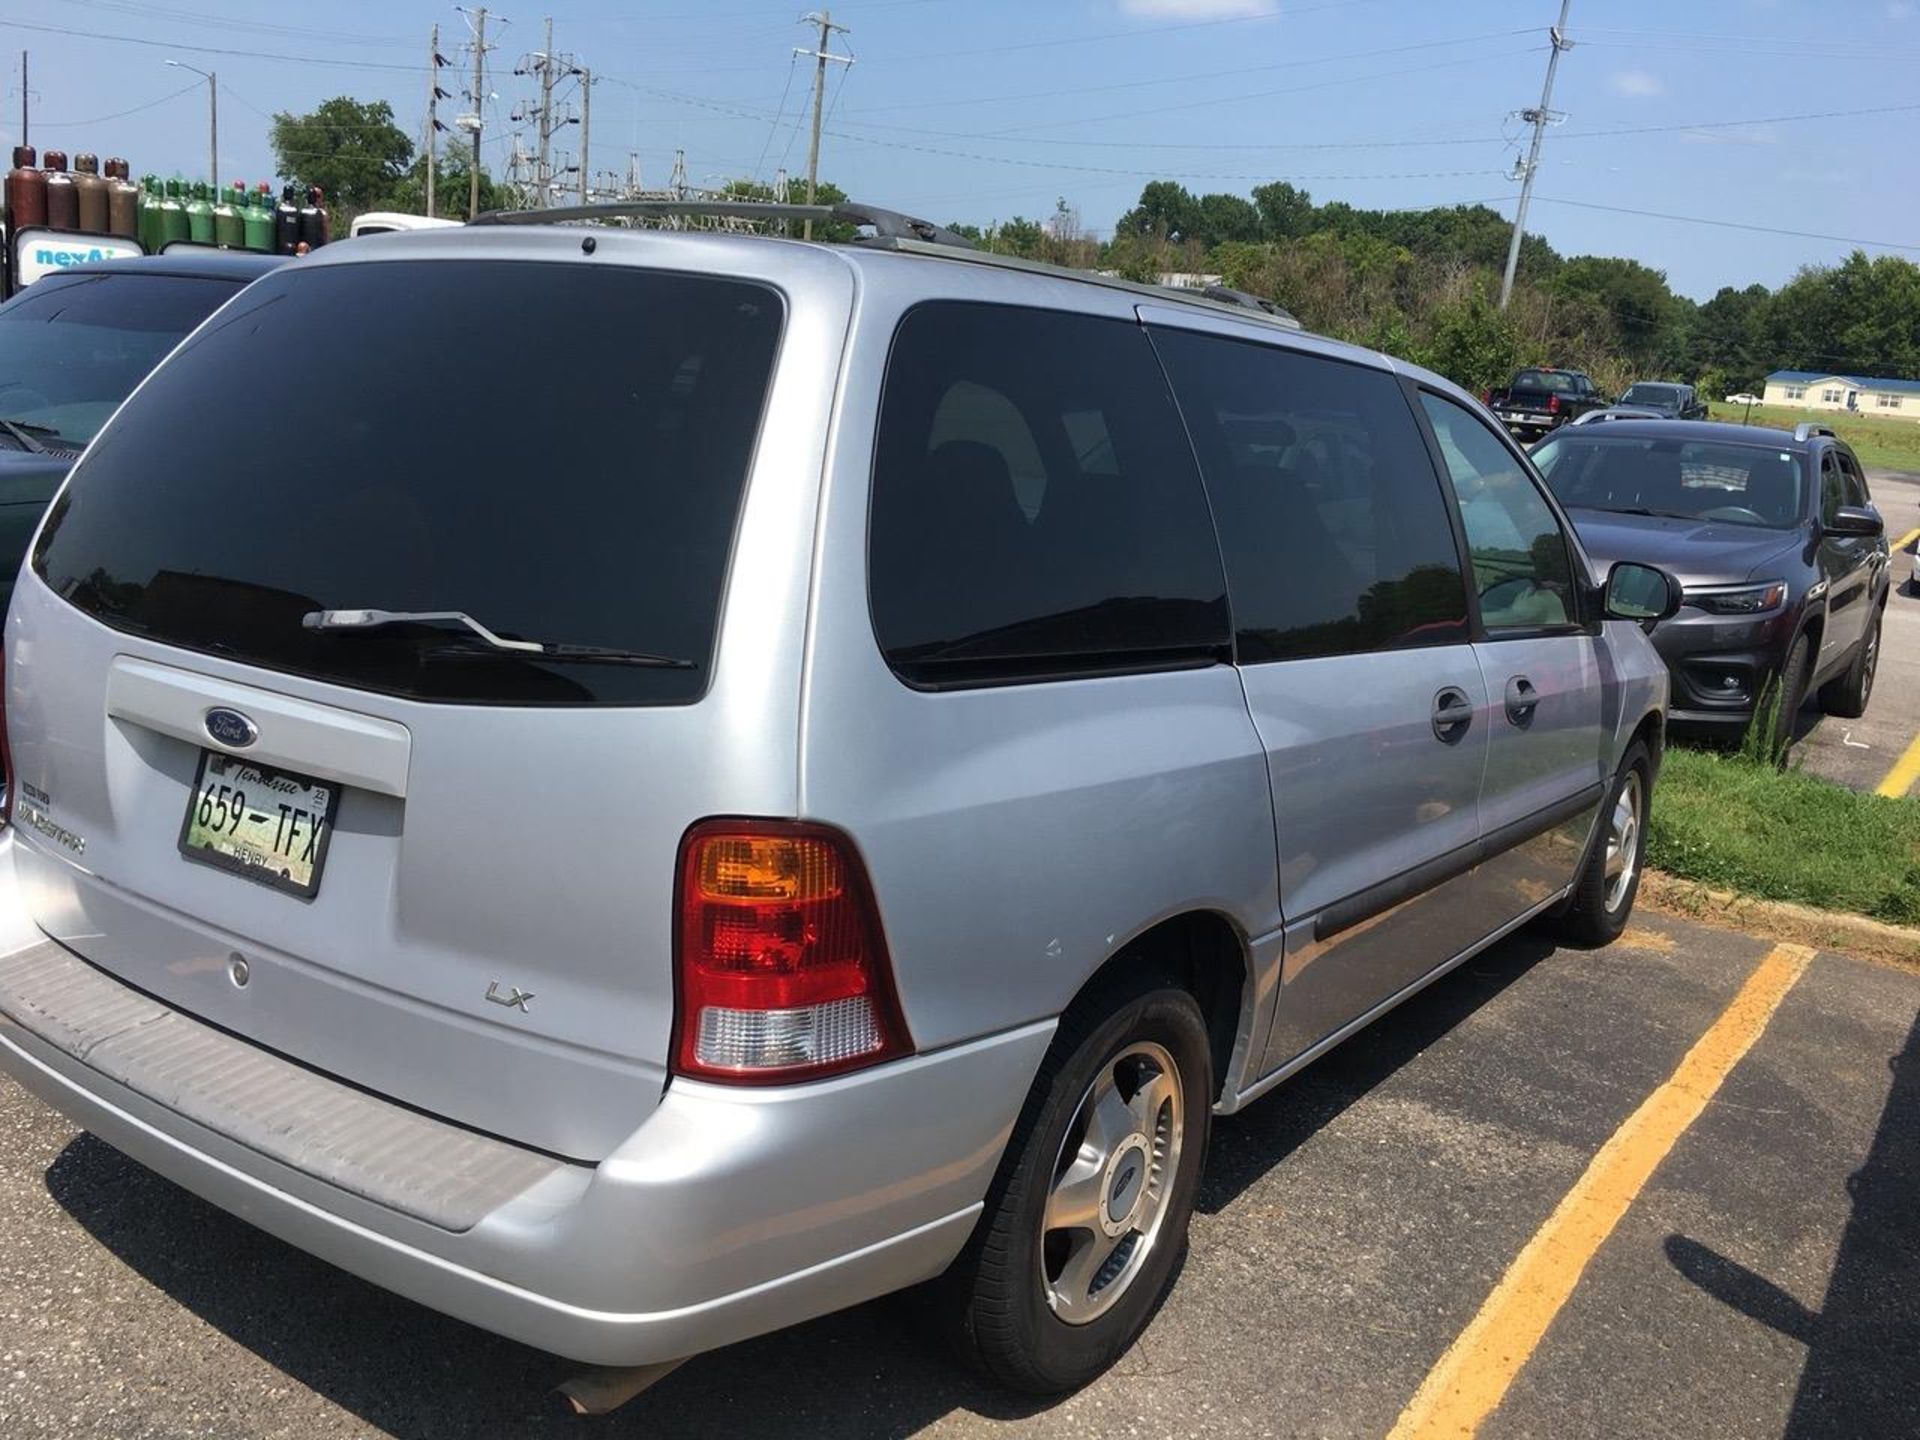 2002 Ford Windstar, VIN: 2FMZA51462BA65371 - Buyer to Remove - Image 3 of 3